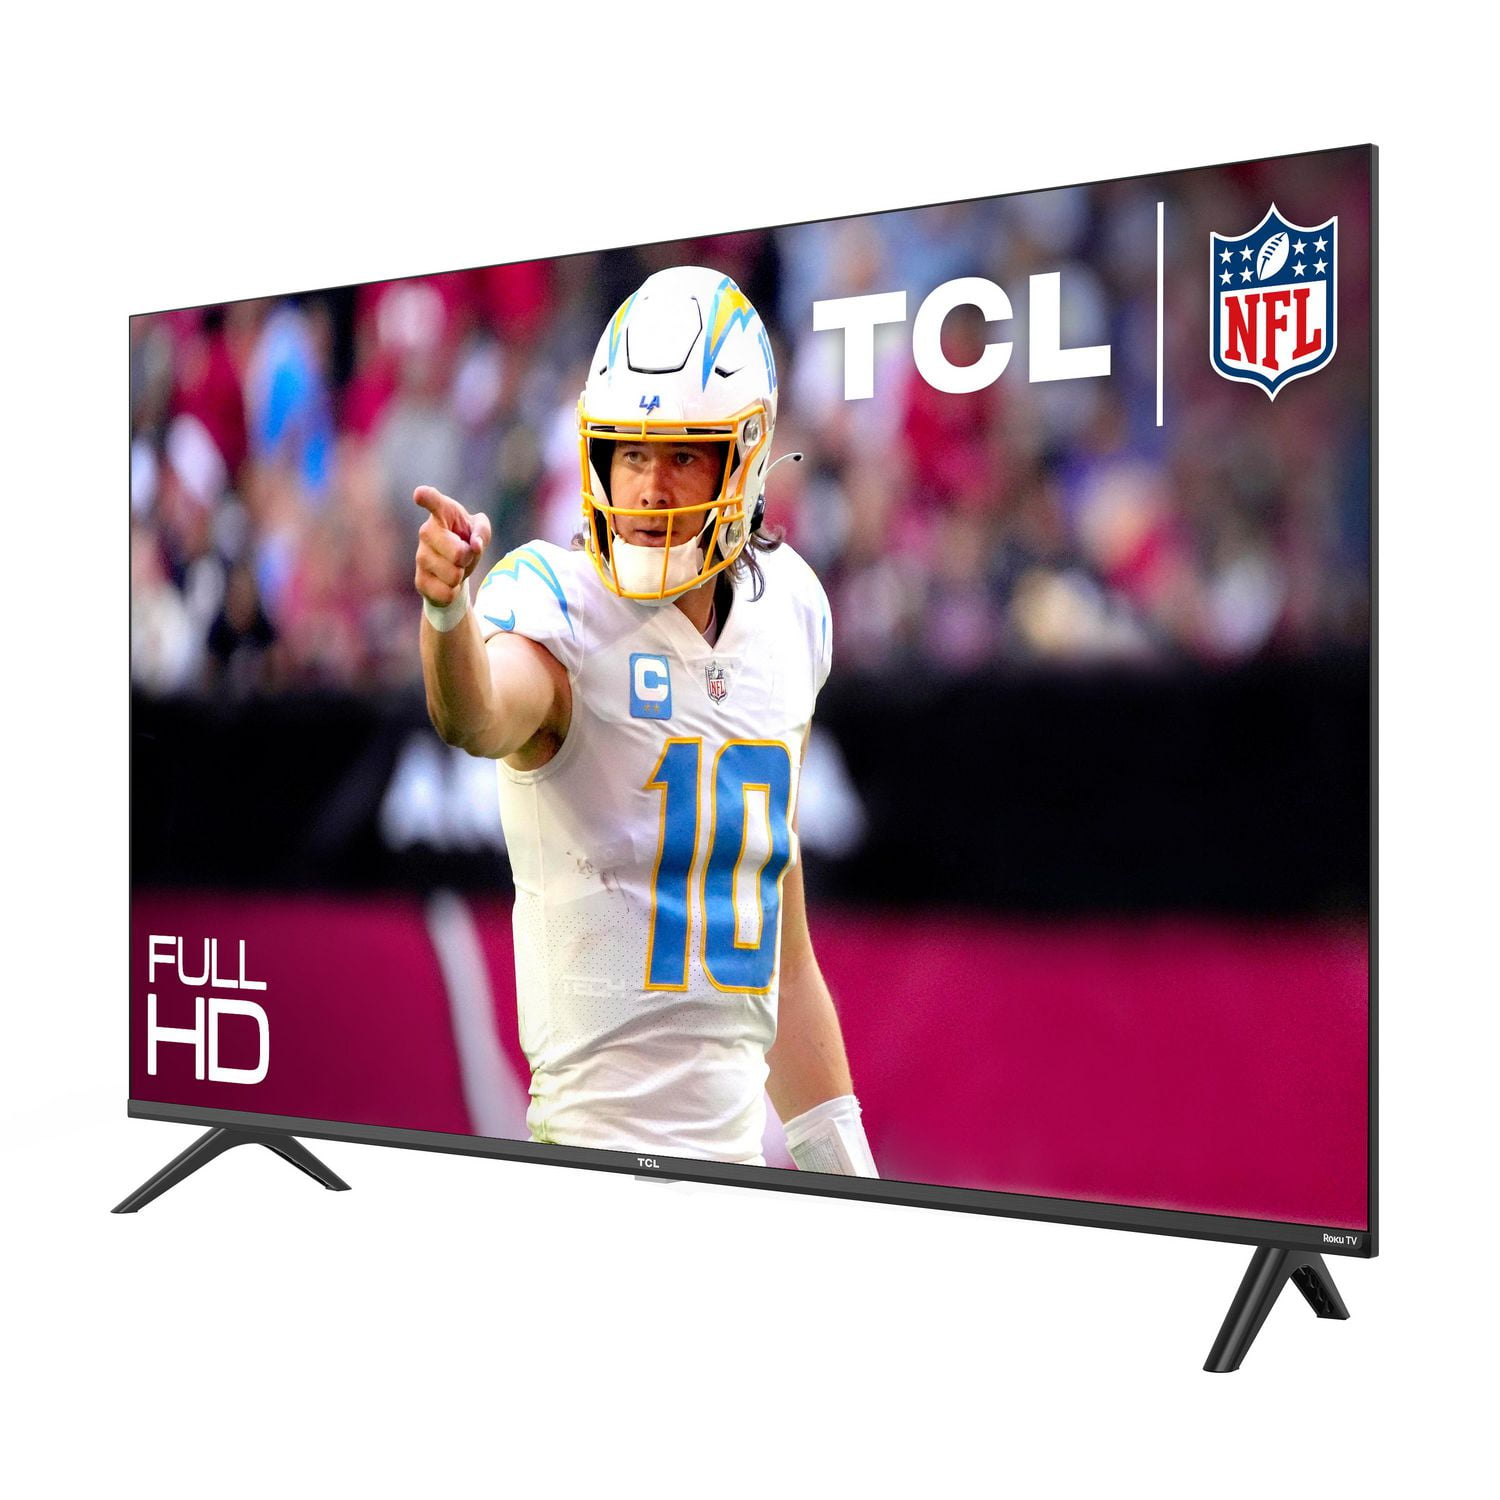 TCL A3 40 inch Smart Android HD LED TV Black